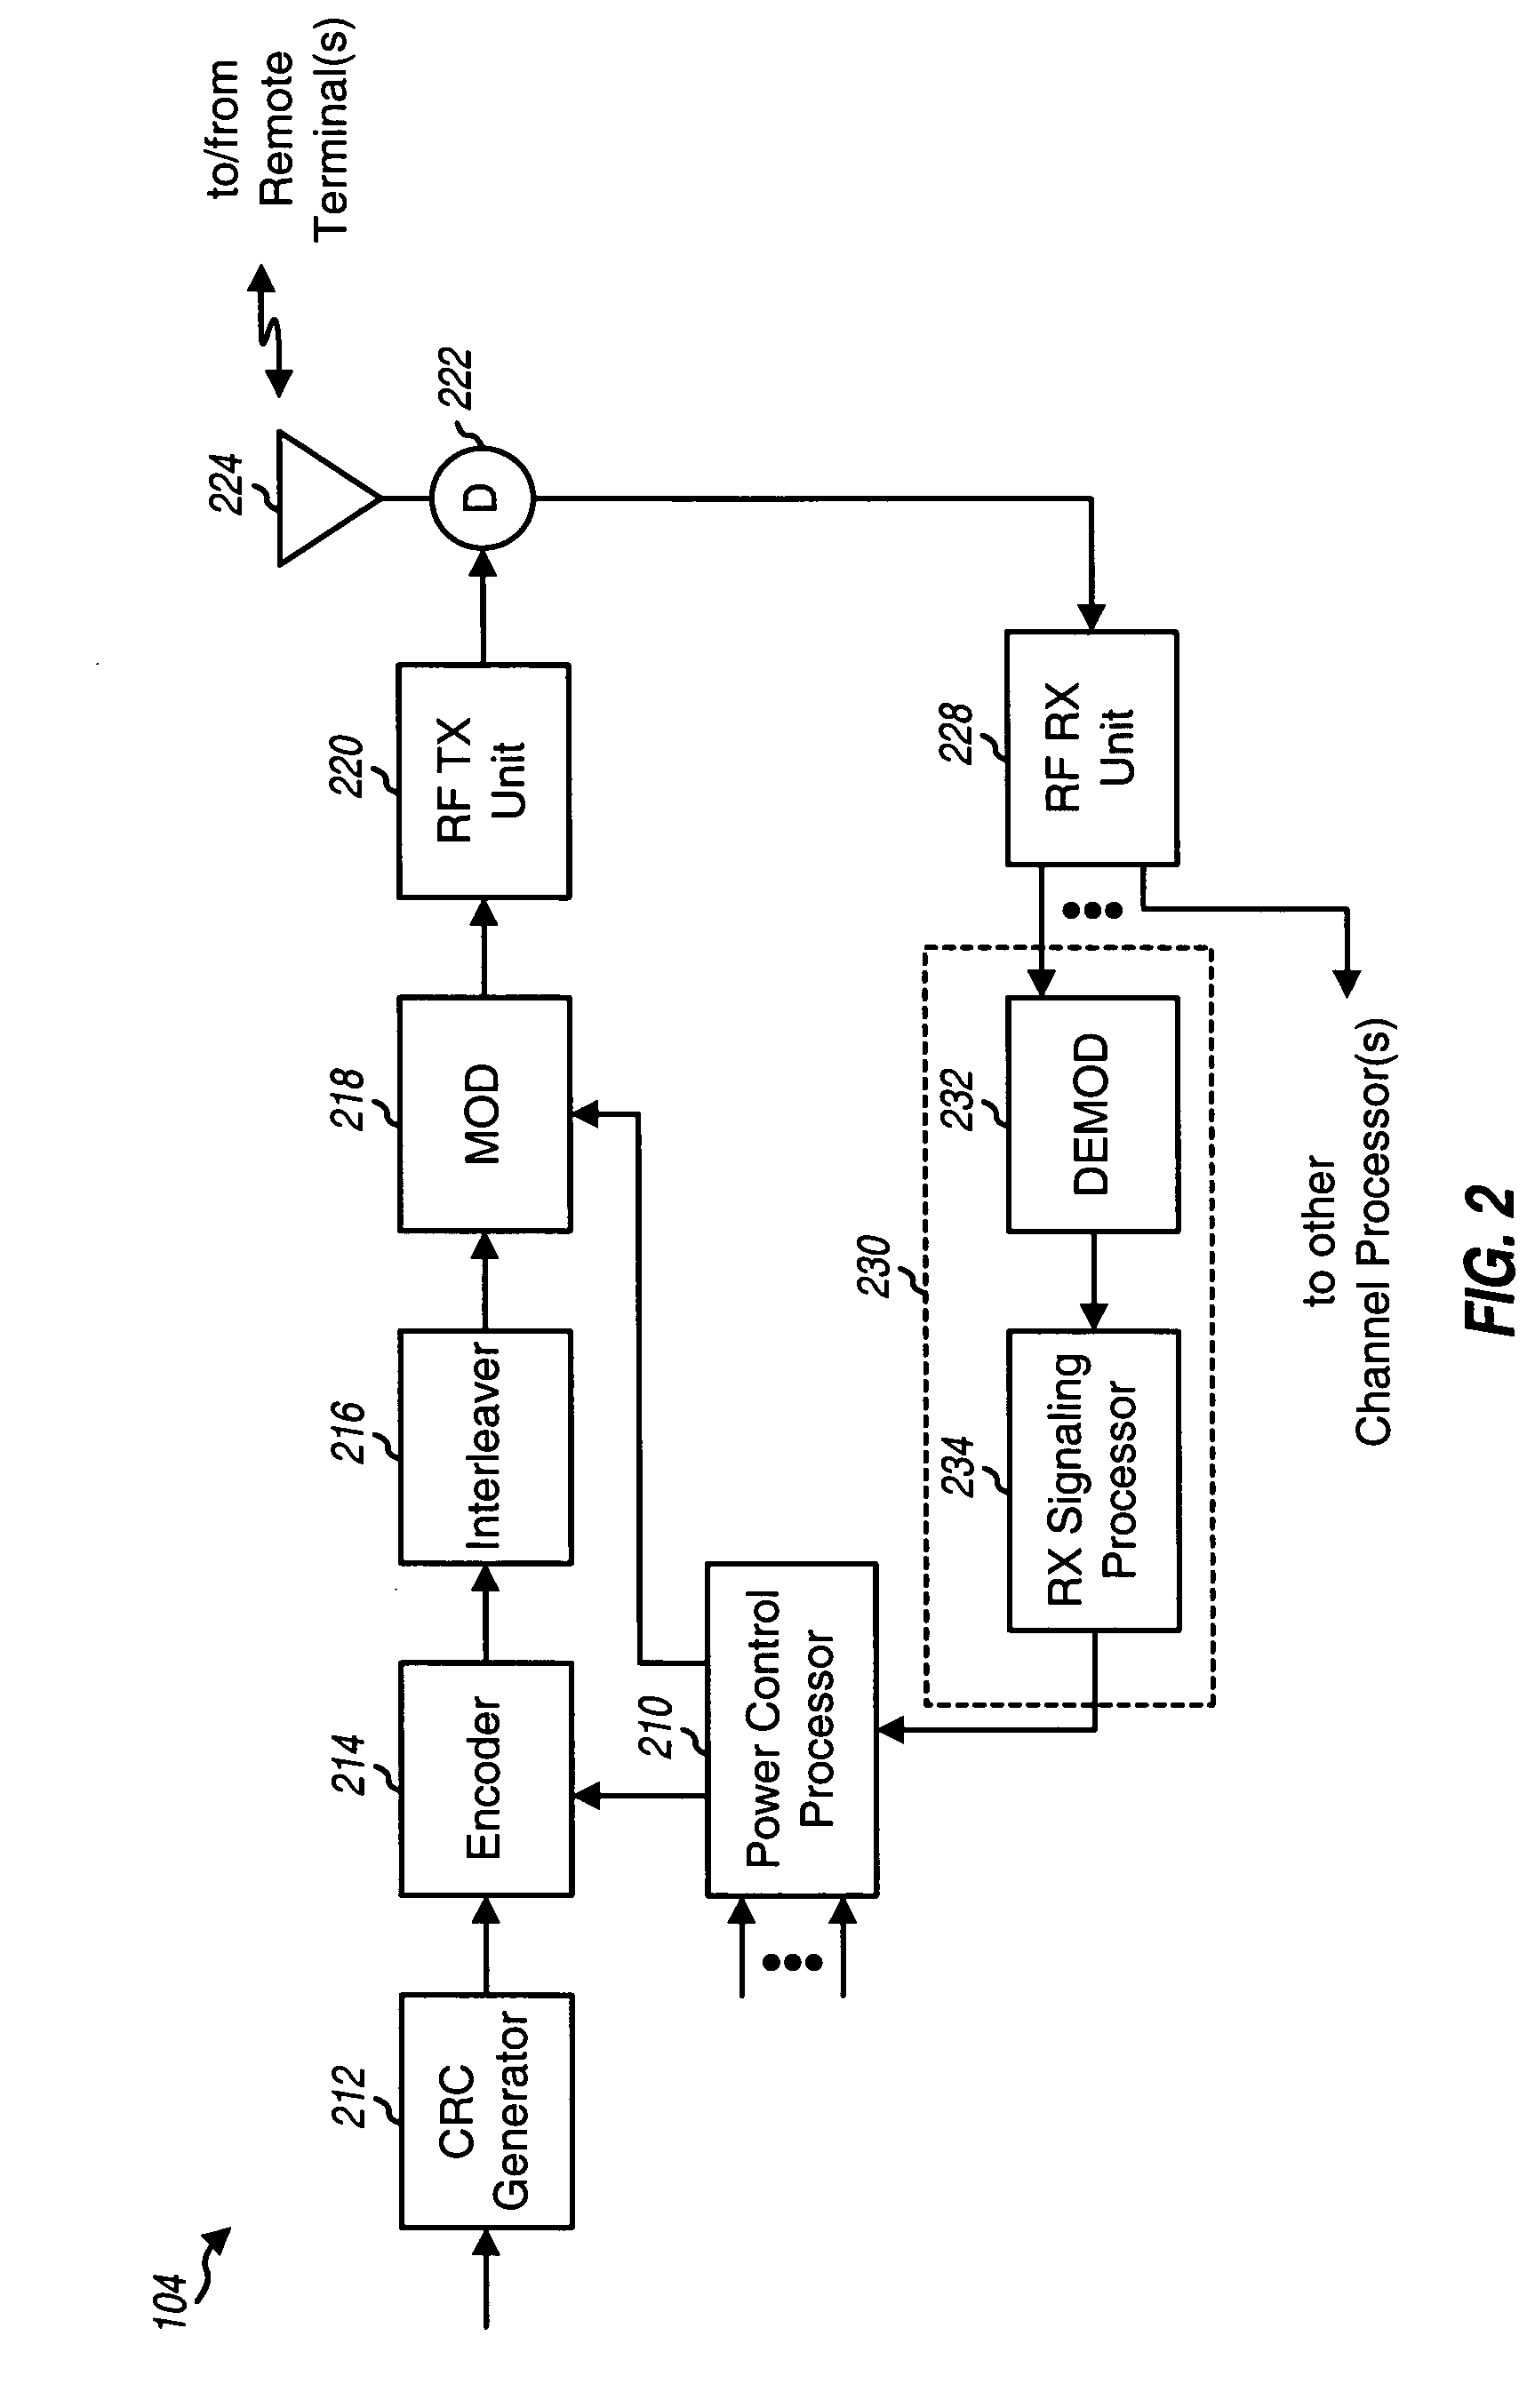 Method and apparatus for adjusting power control setpoint in a wireless communication system